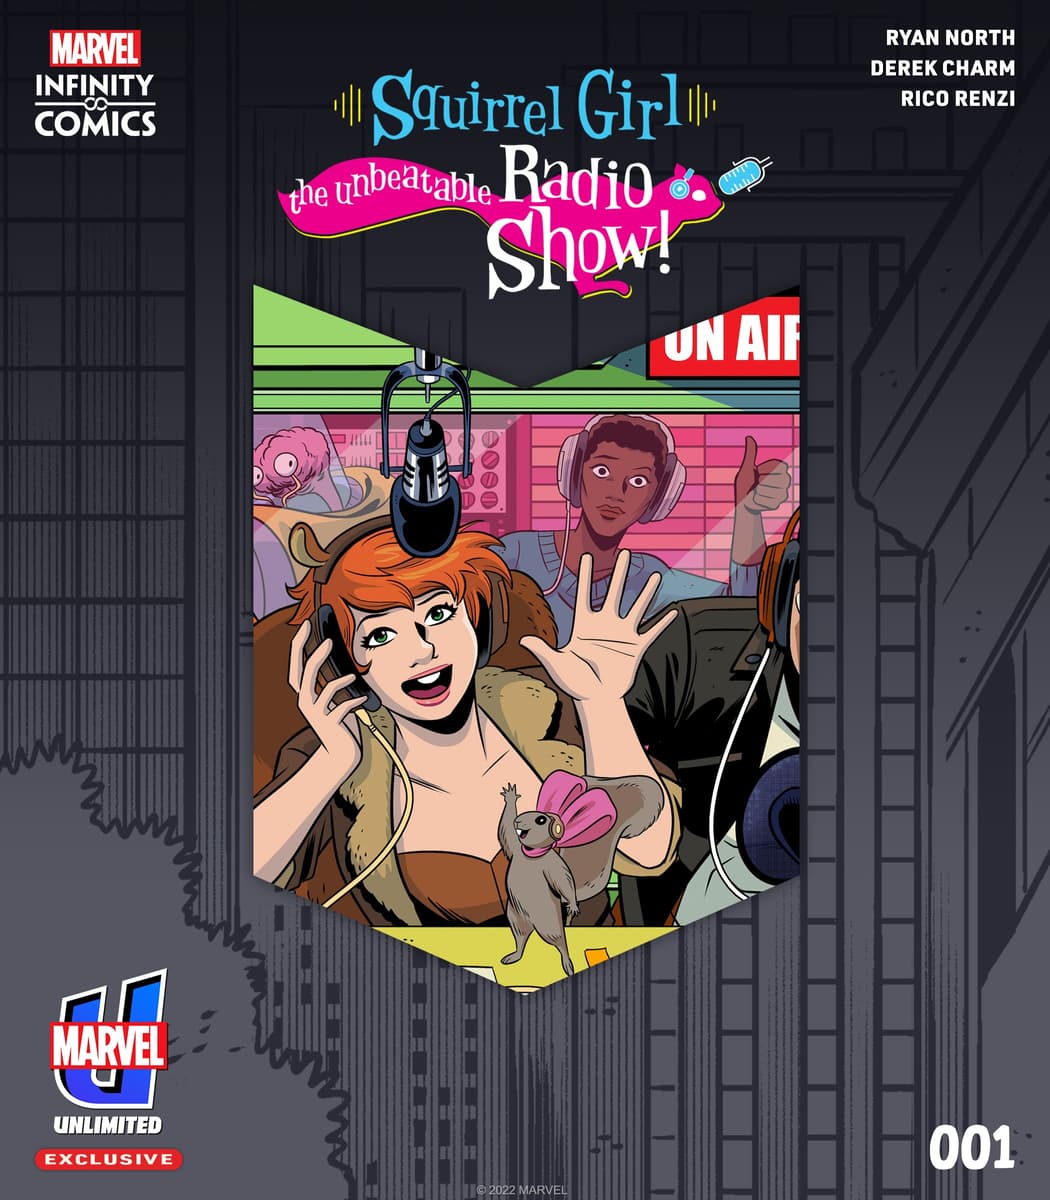 Squirrel Girl in a radio booth hosting a podcast!